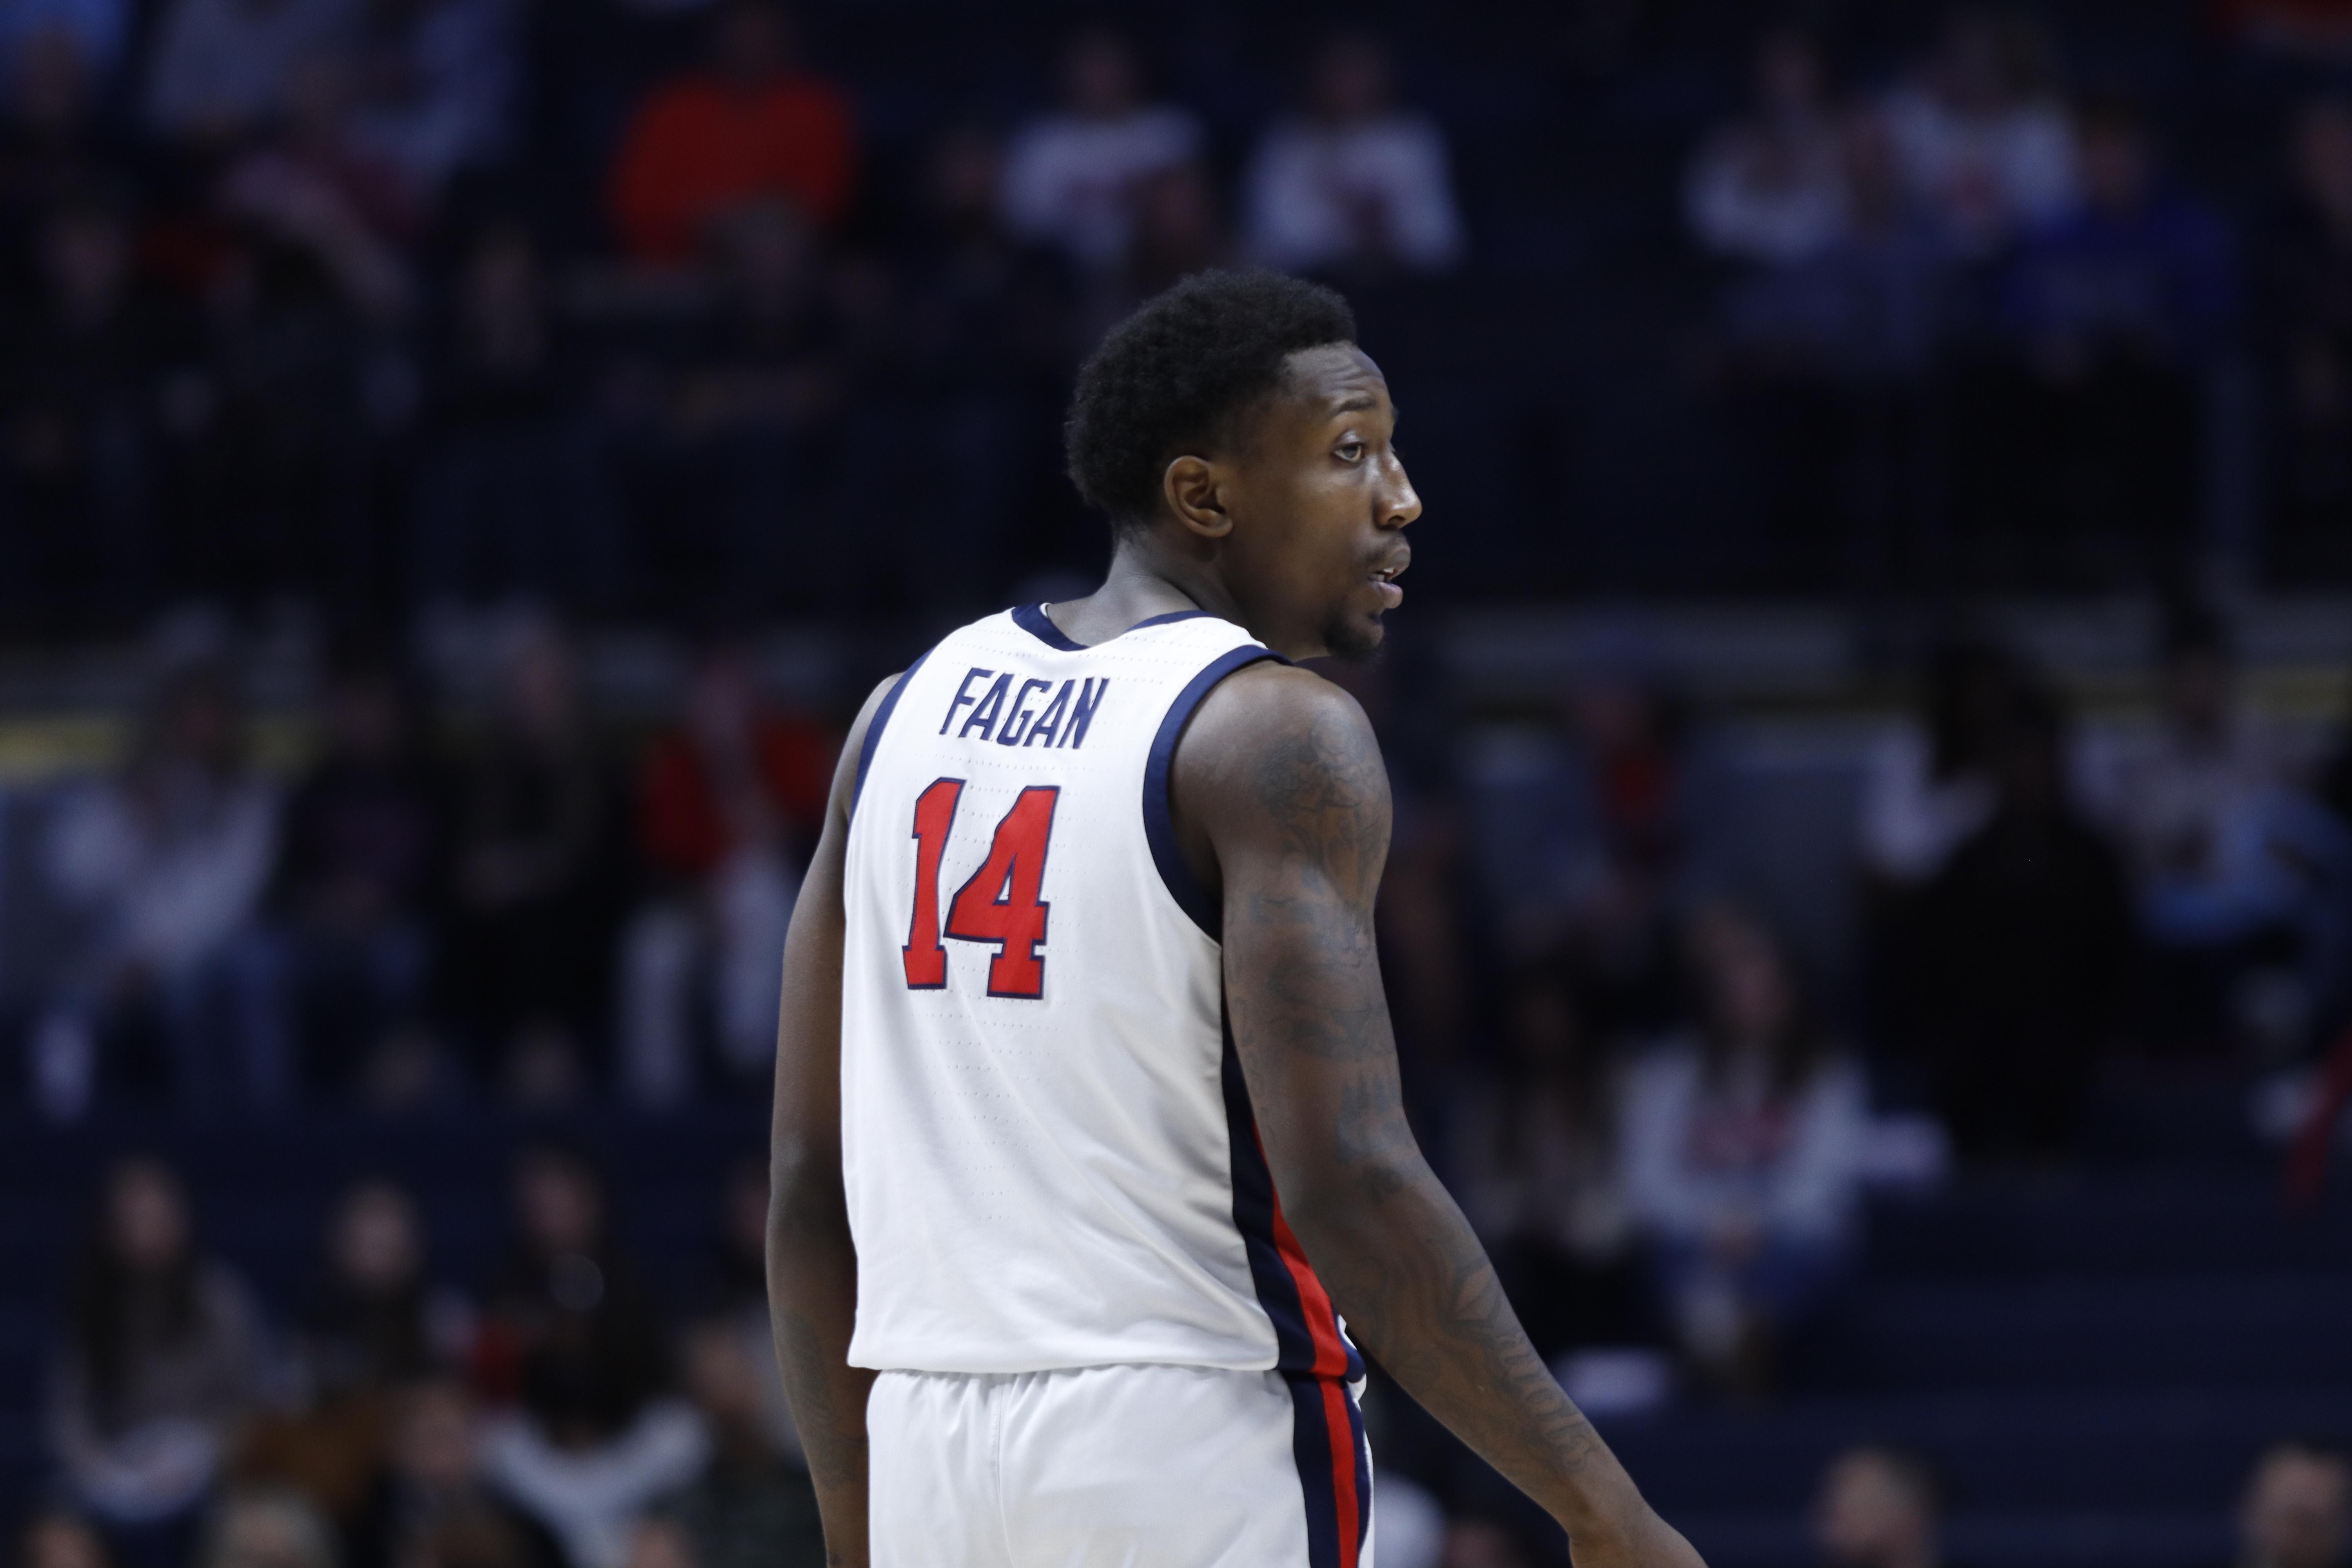 Ole Miss Basketball Falls On The Road To Florida In Overtime The Grove Report Sports